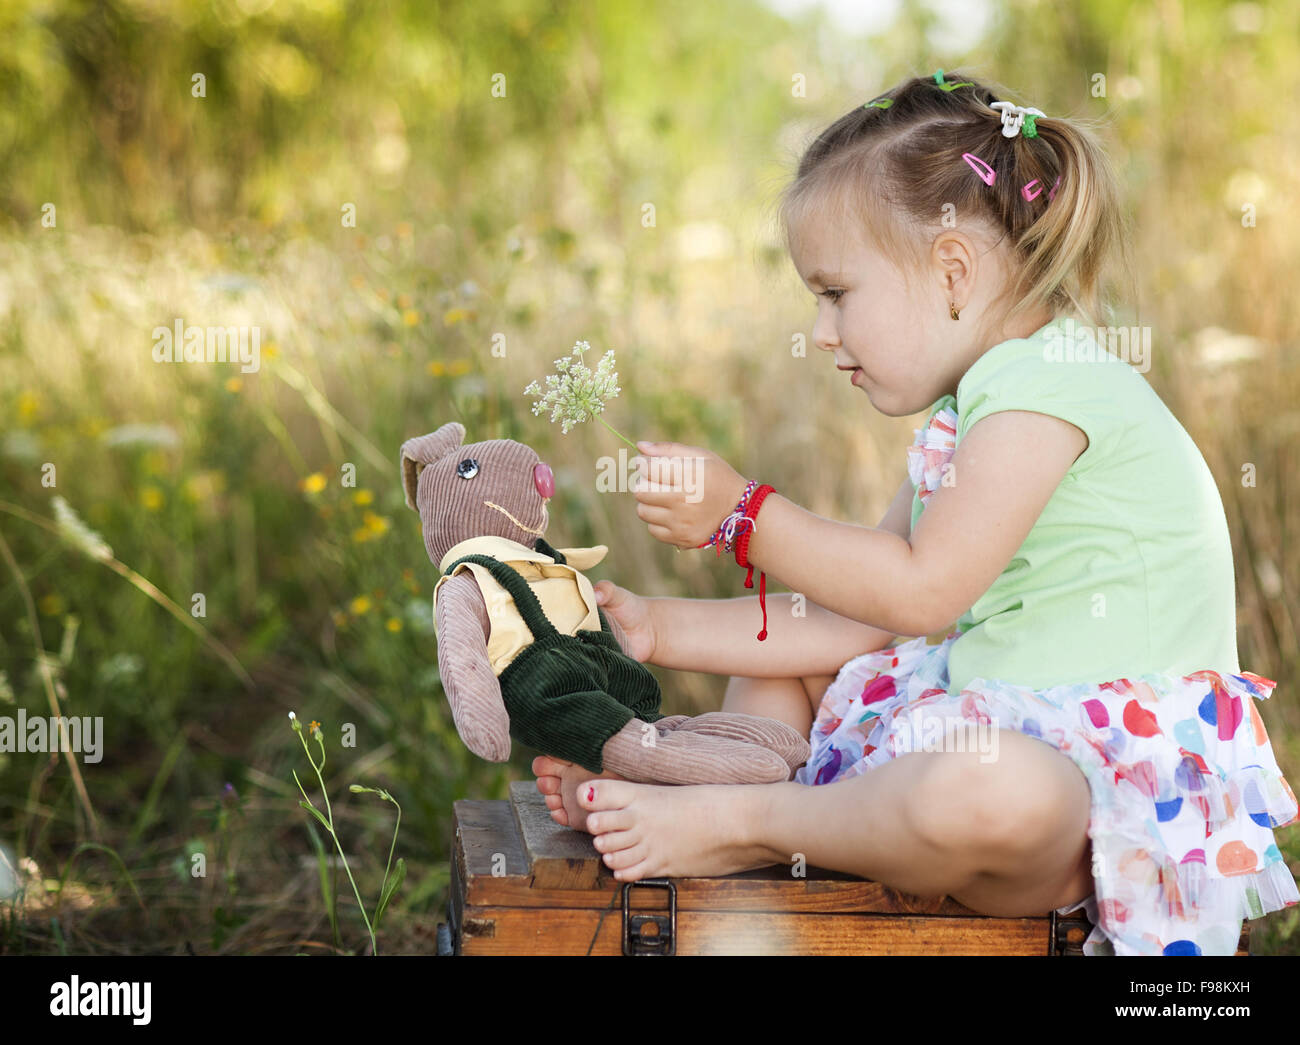 Summer outdoor portrait of cute little girl sitting on meadow with old suitcase with toys Stock Photo